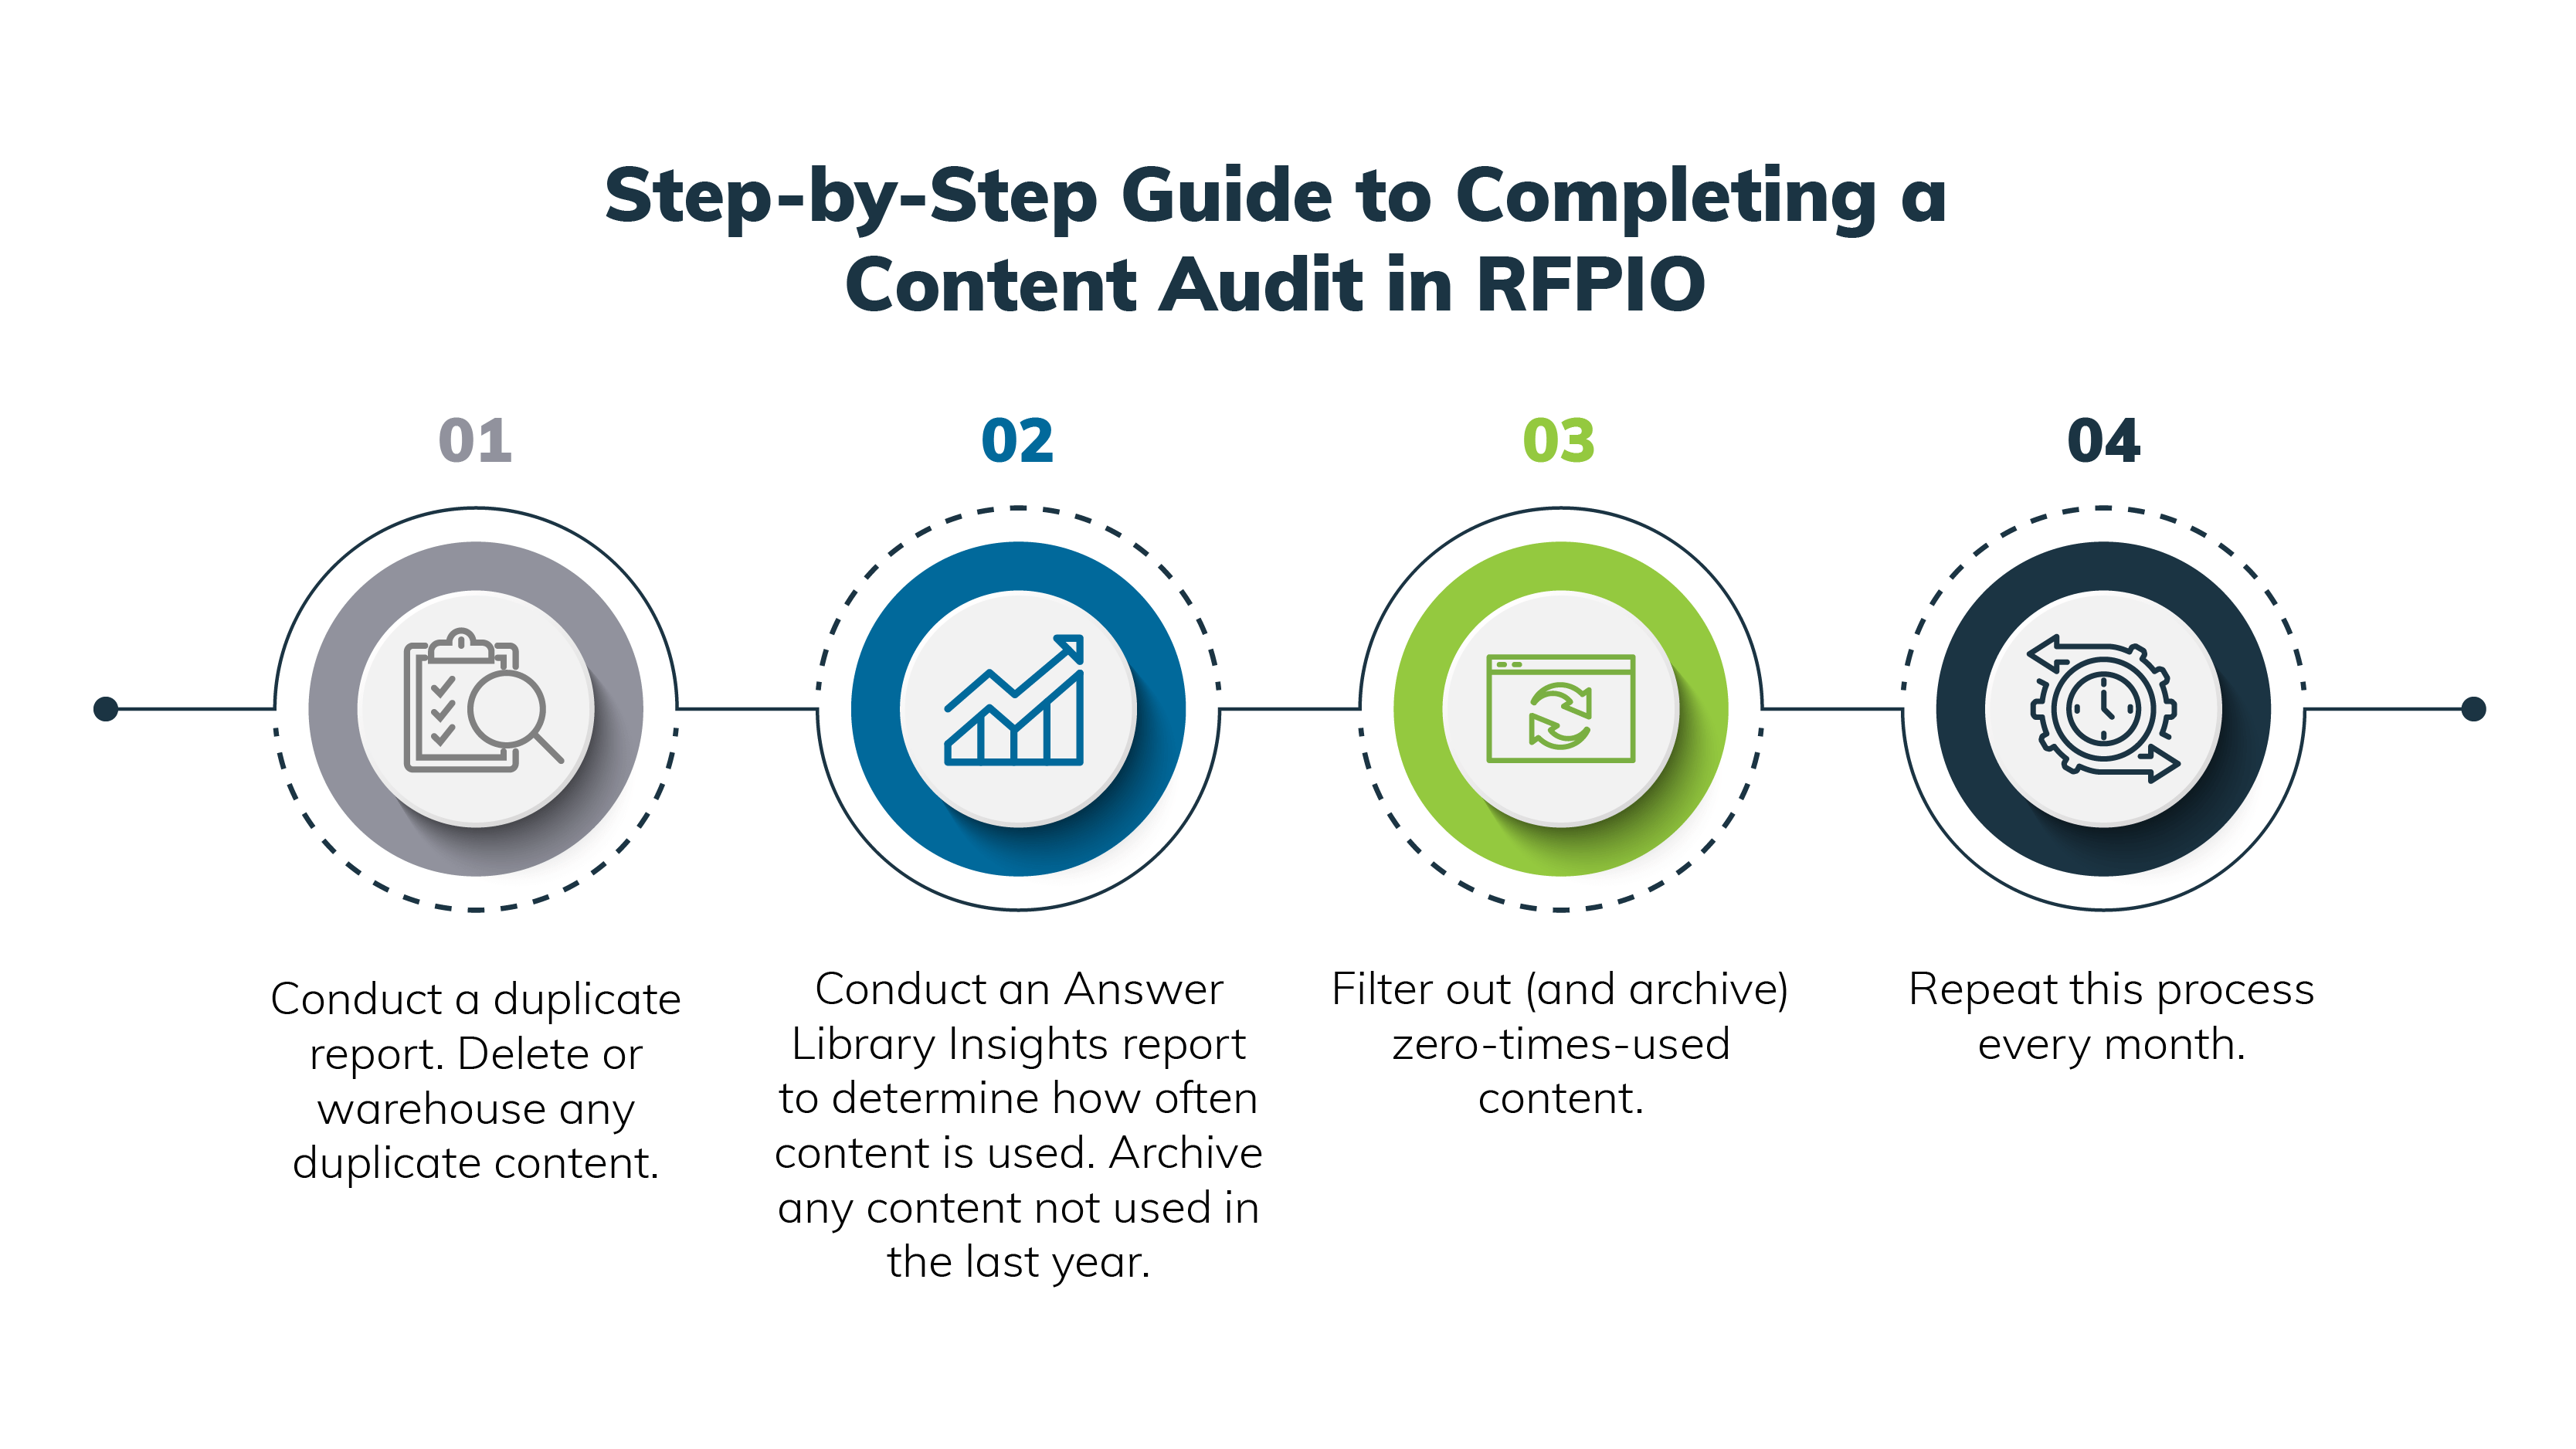 A step-by-step guide to completing a content audit in RFPIO